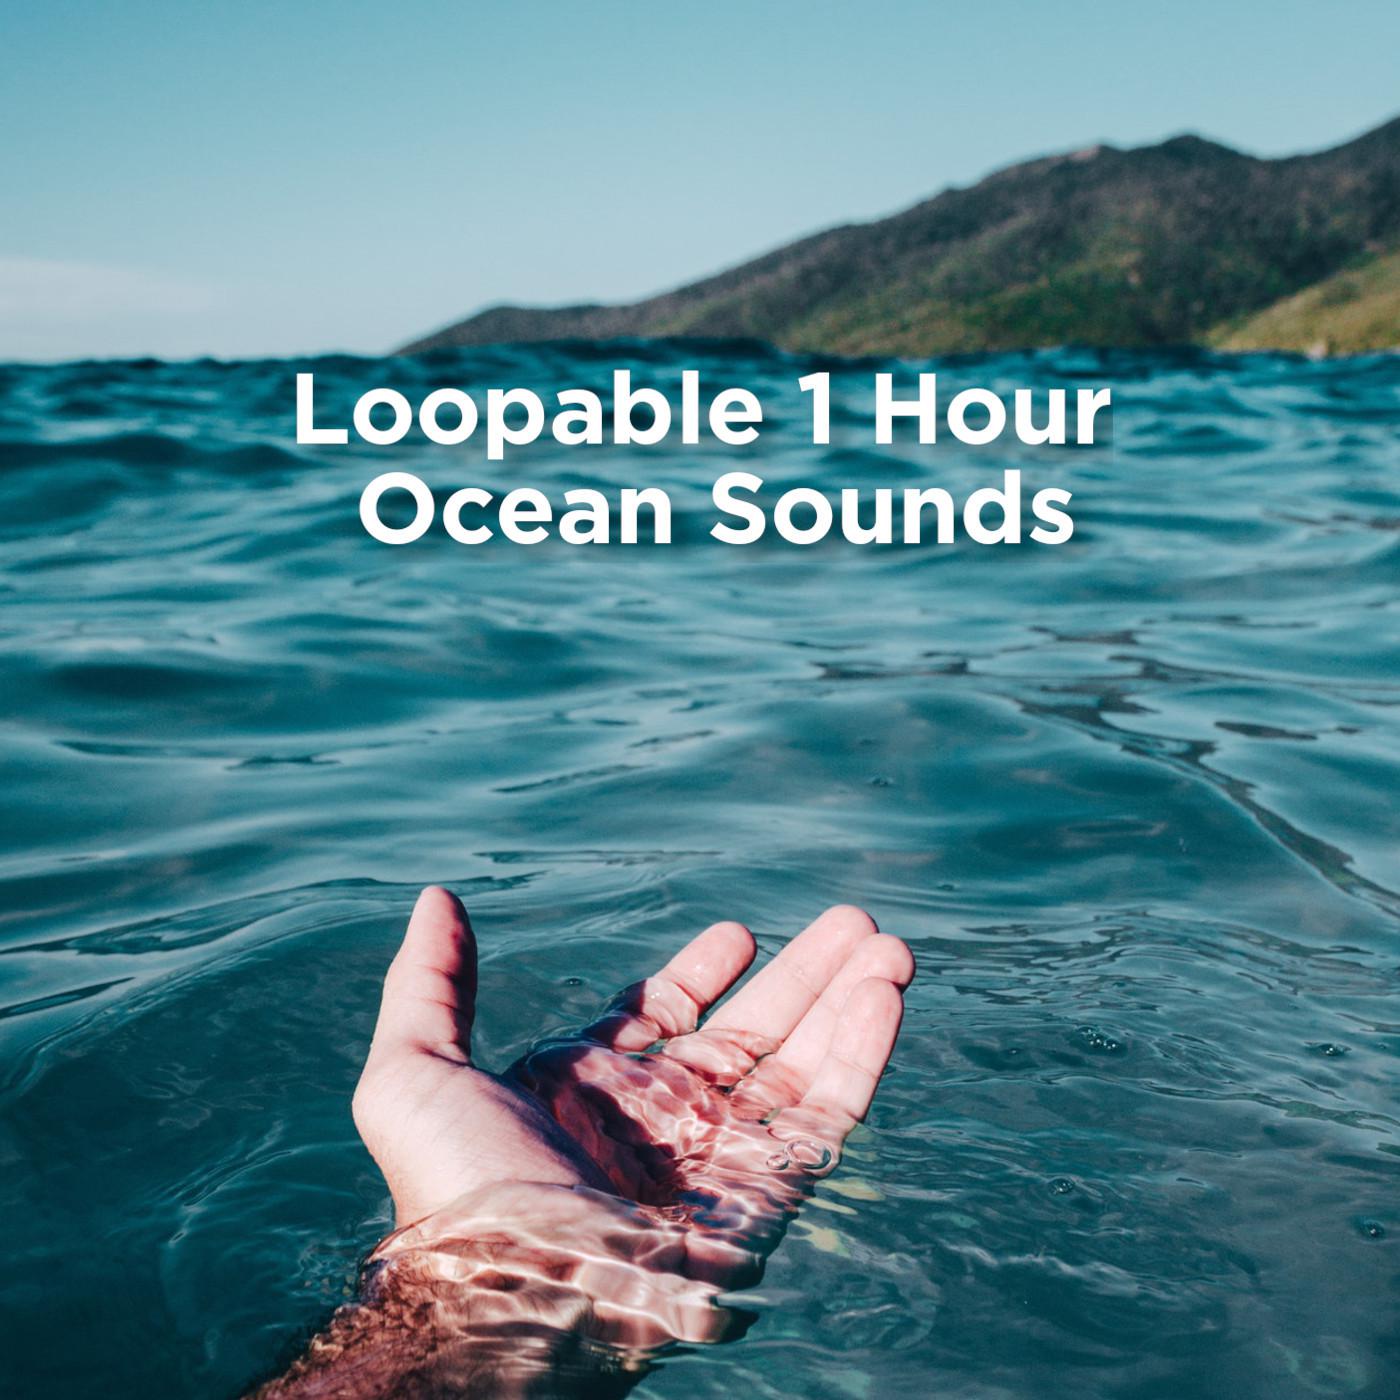 Loopable 1 Hour Ocean Sounds